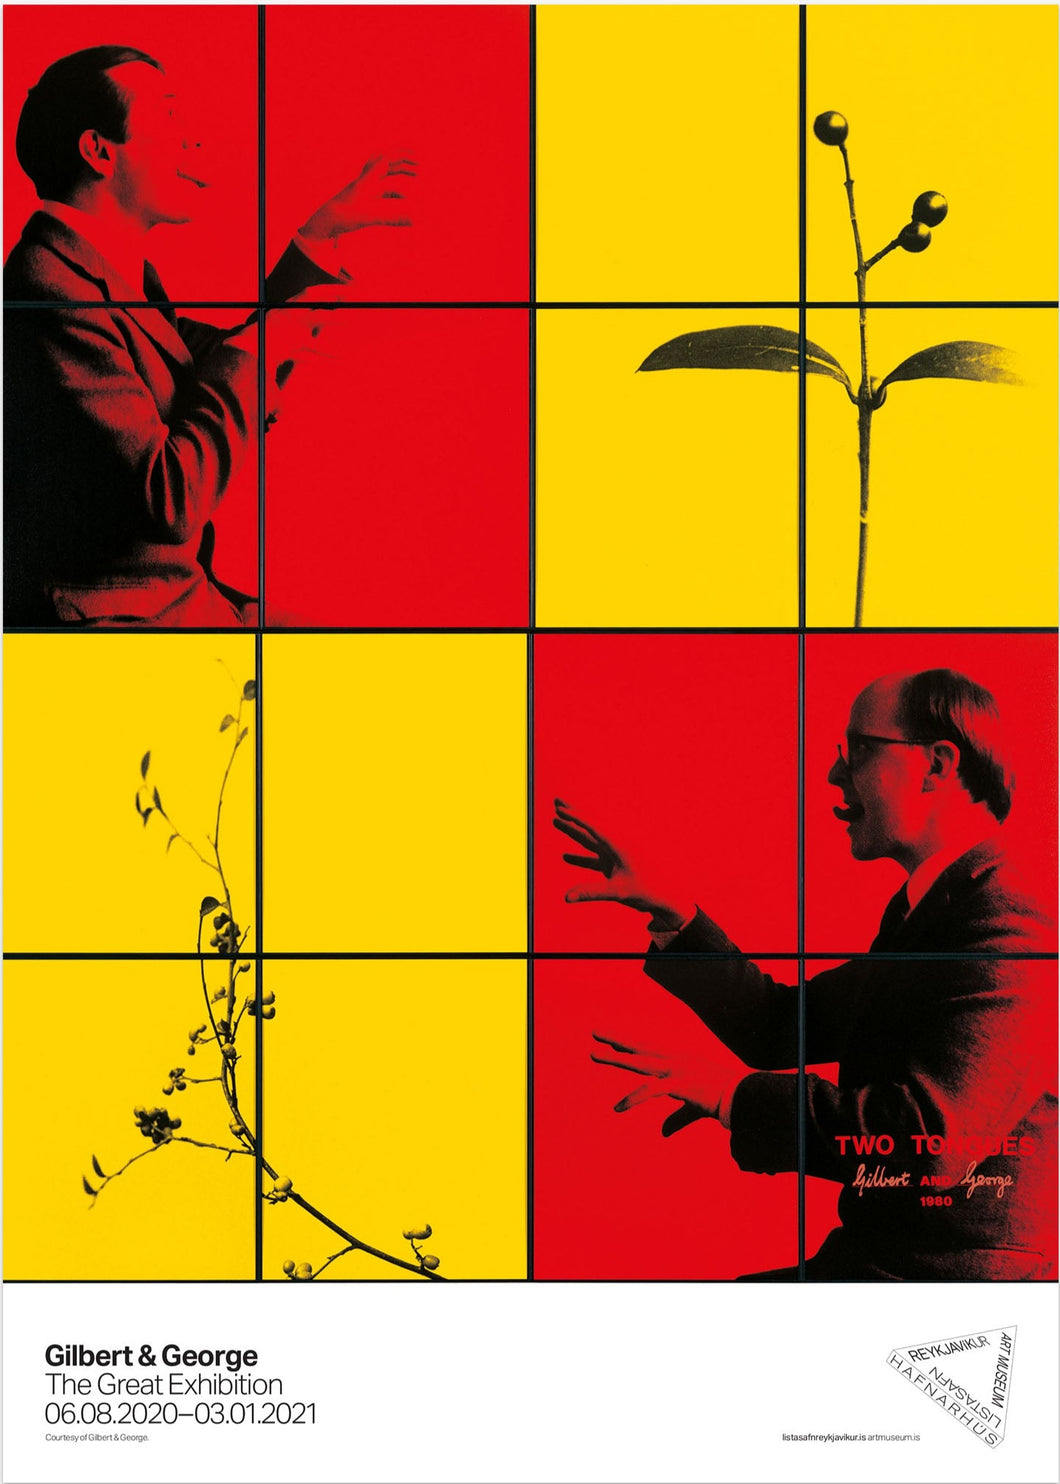 Gilbert & George, Two Tongues